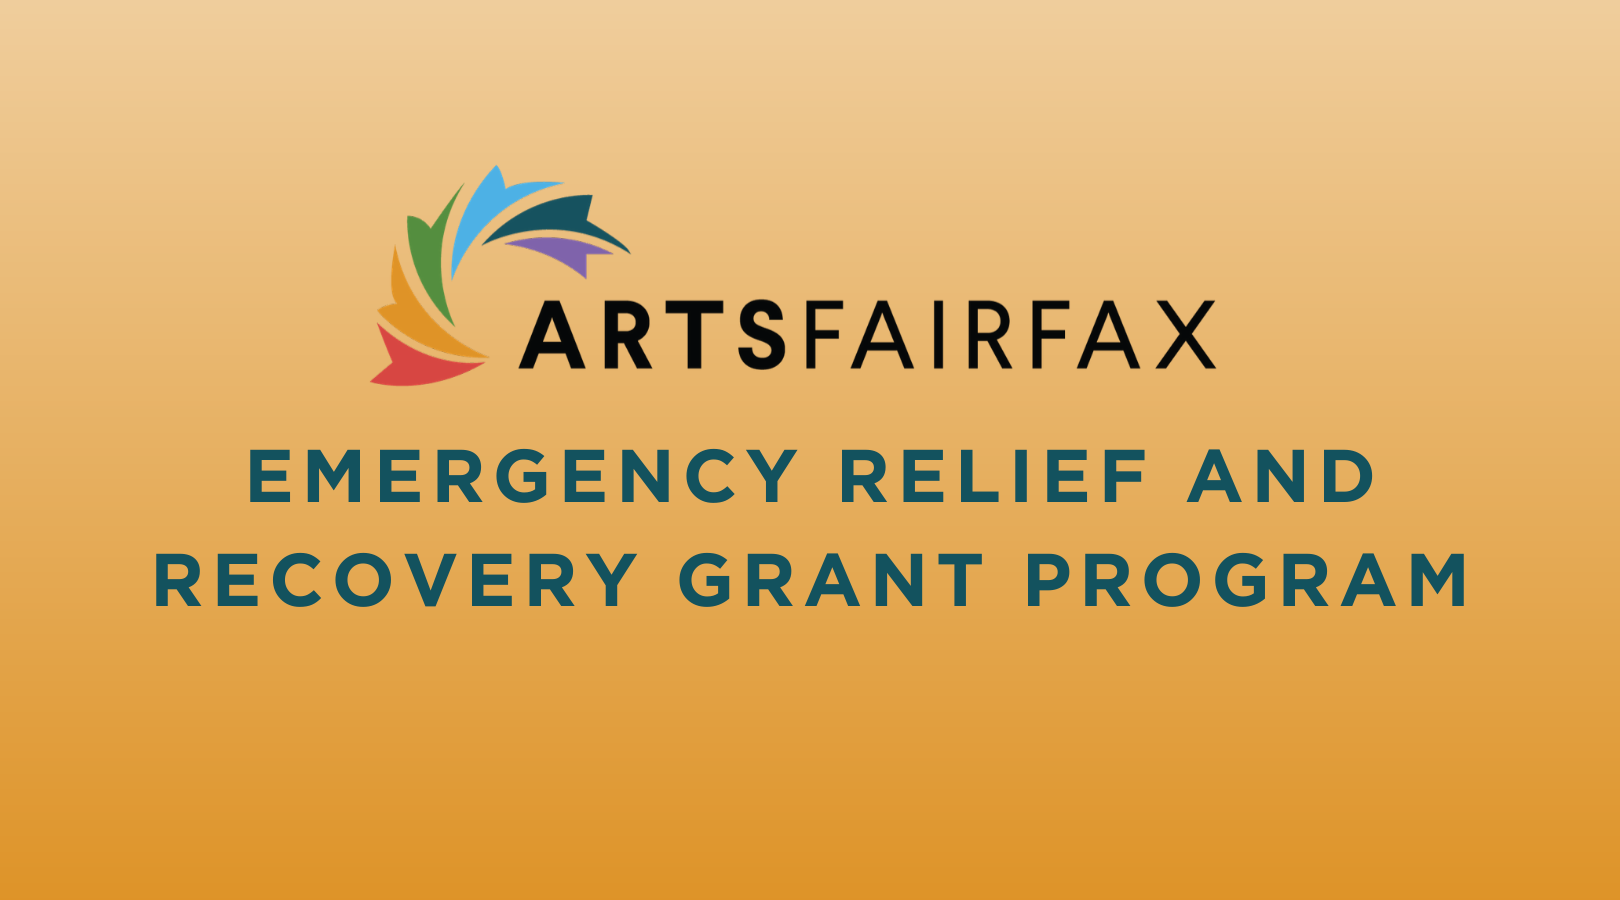 ARTSFAIRFAX Launches Relief Fund for Arts Organizations and Artists